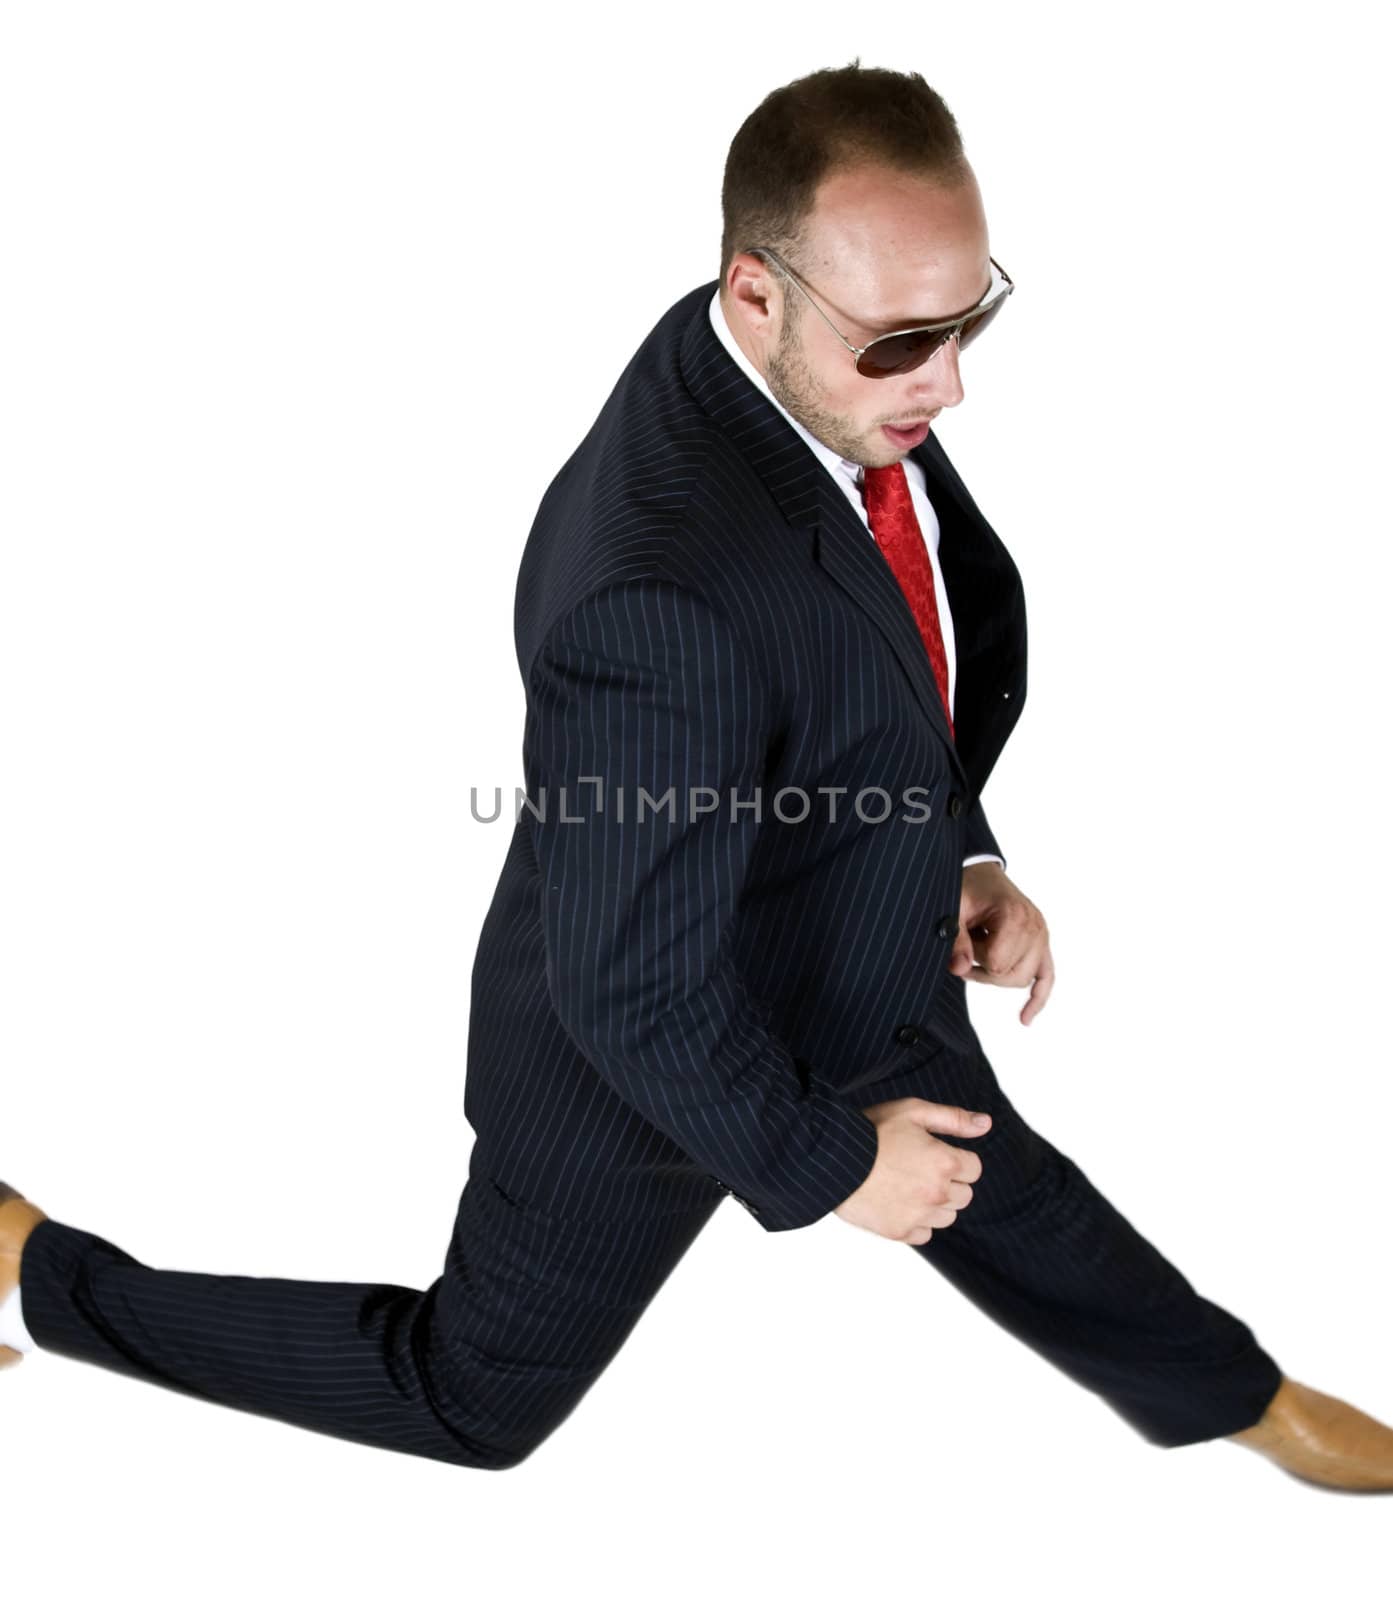 leaping man on isolated background
